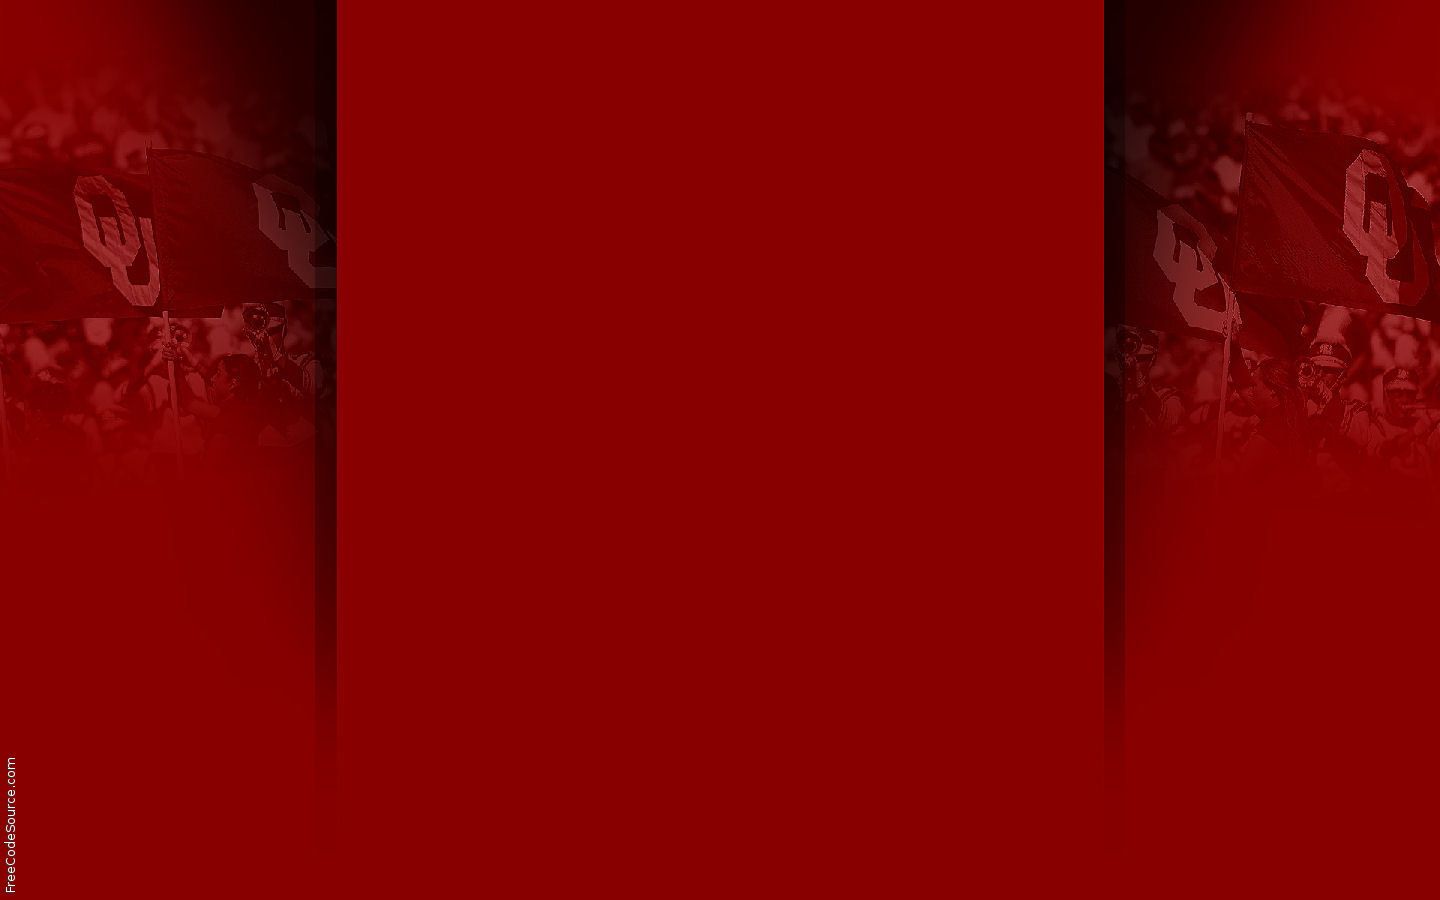 Free Oklahoma University Sooners Backgrounds For PowerPoint ...